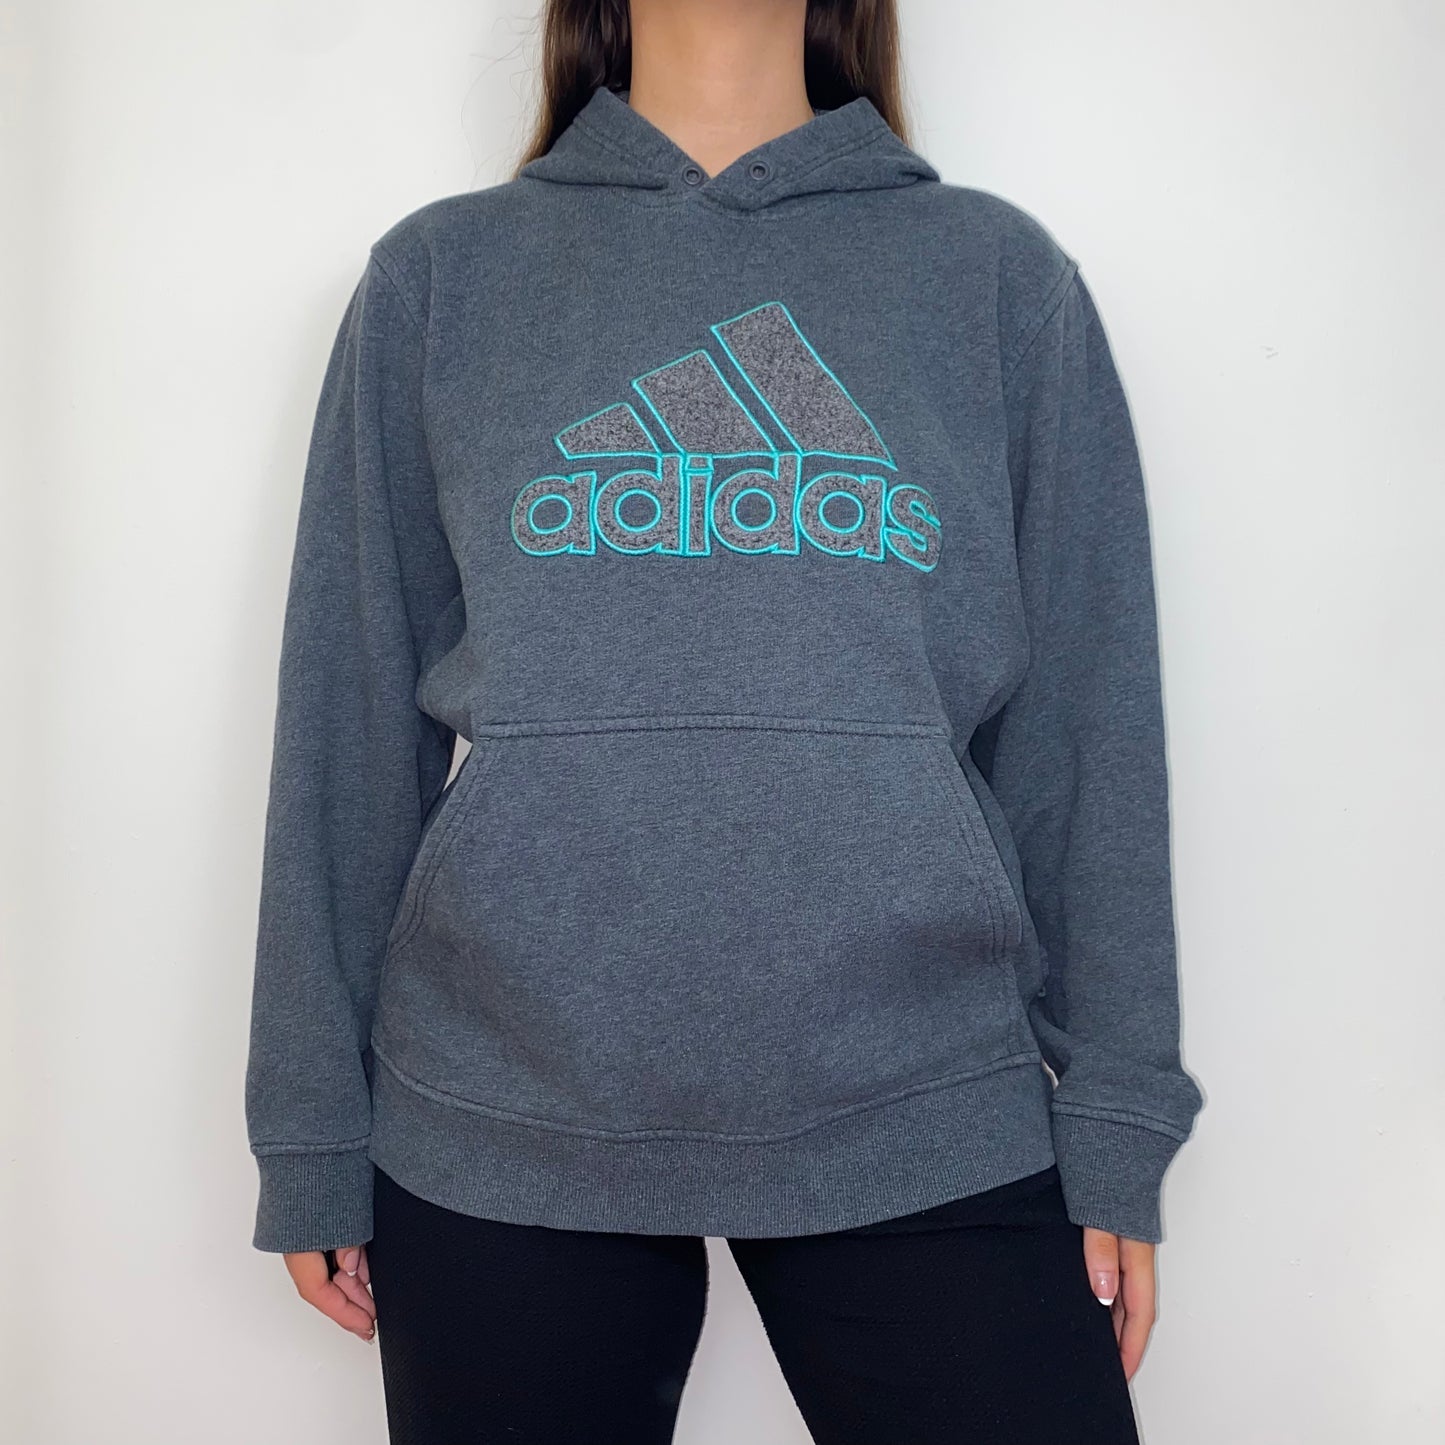 grey hoodie with blue adidas big text logo shown on a model wearing black trousers